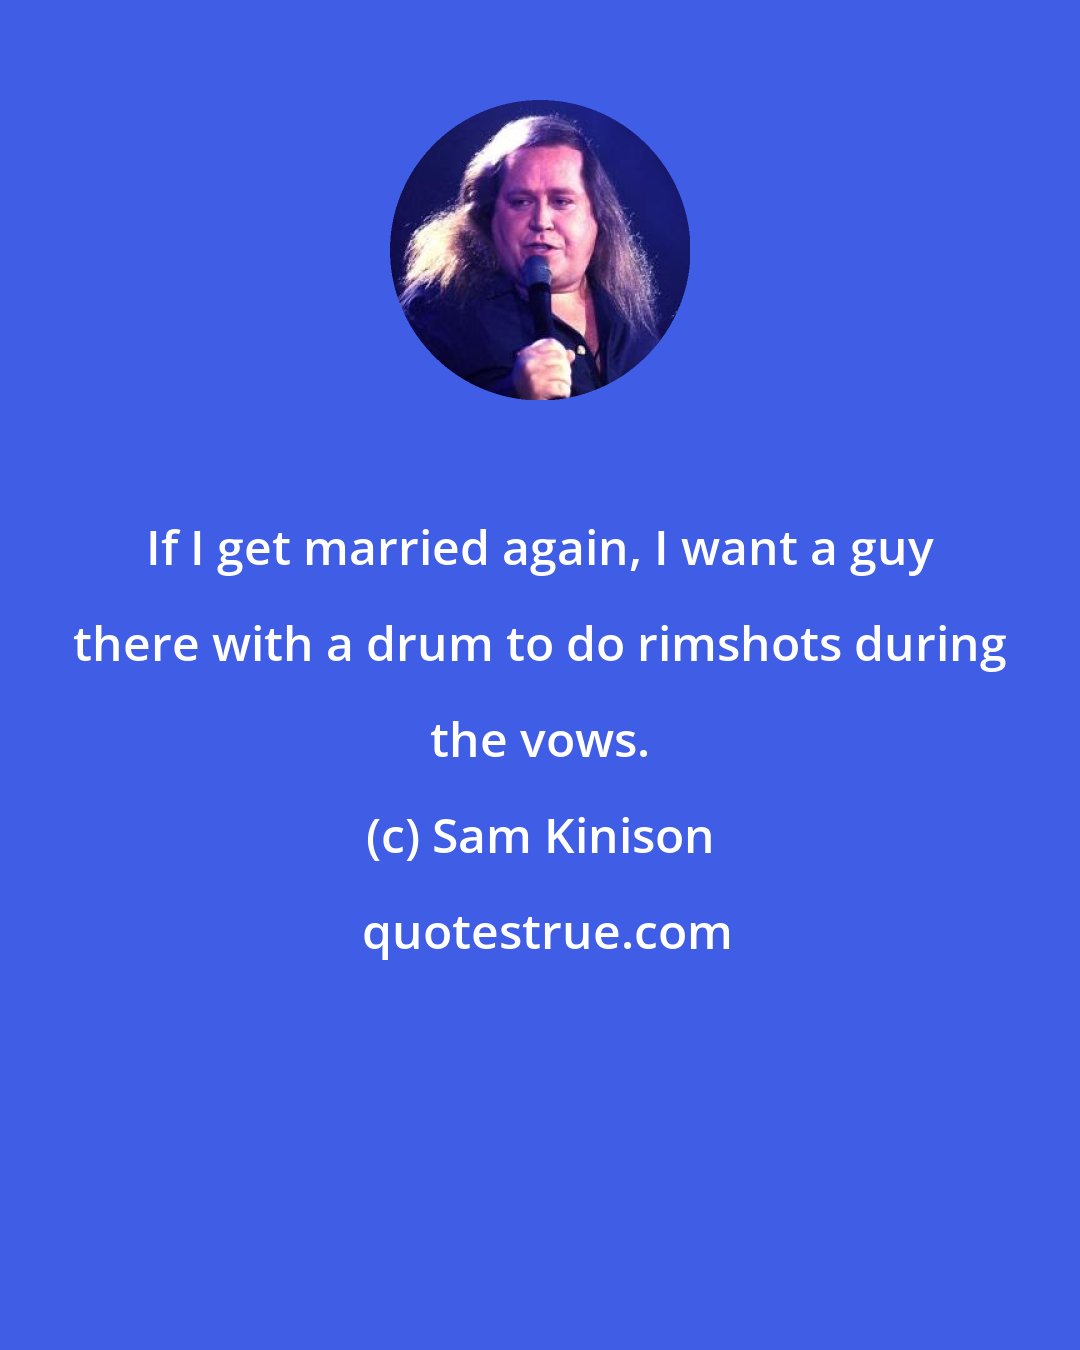 Sam Kinison: If I get married again, I want a guy there with a drum to do rimshots during the vows.